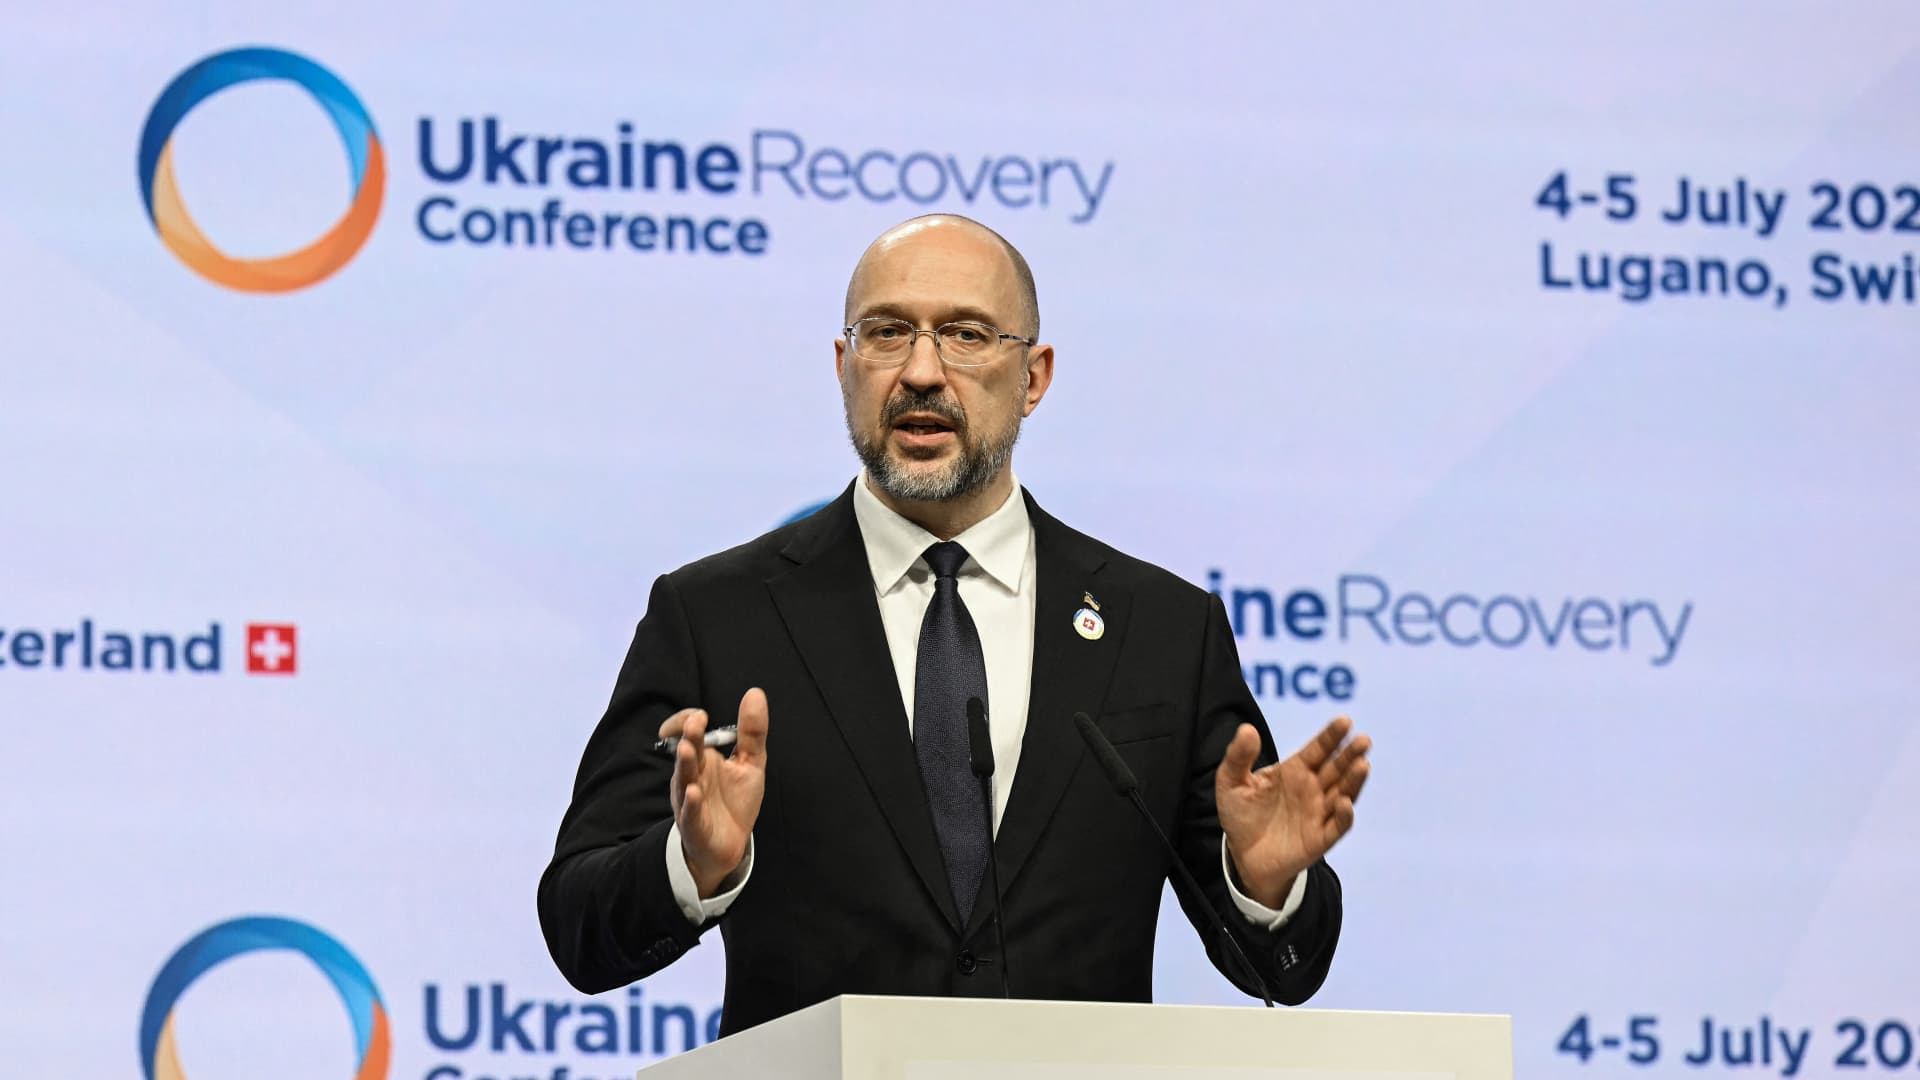 Ukraine's Prime Minister Denys Shmyhal gives a press conference at the end of a two-day International conference on reconstruction of Ukraine, in Lugano on July 5, 2022.